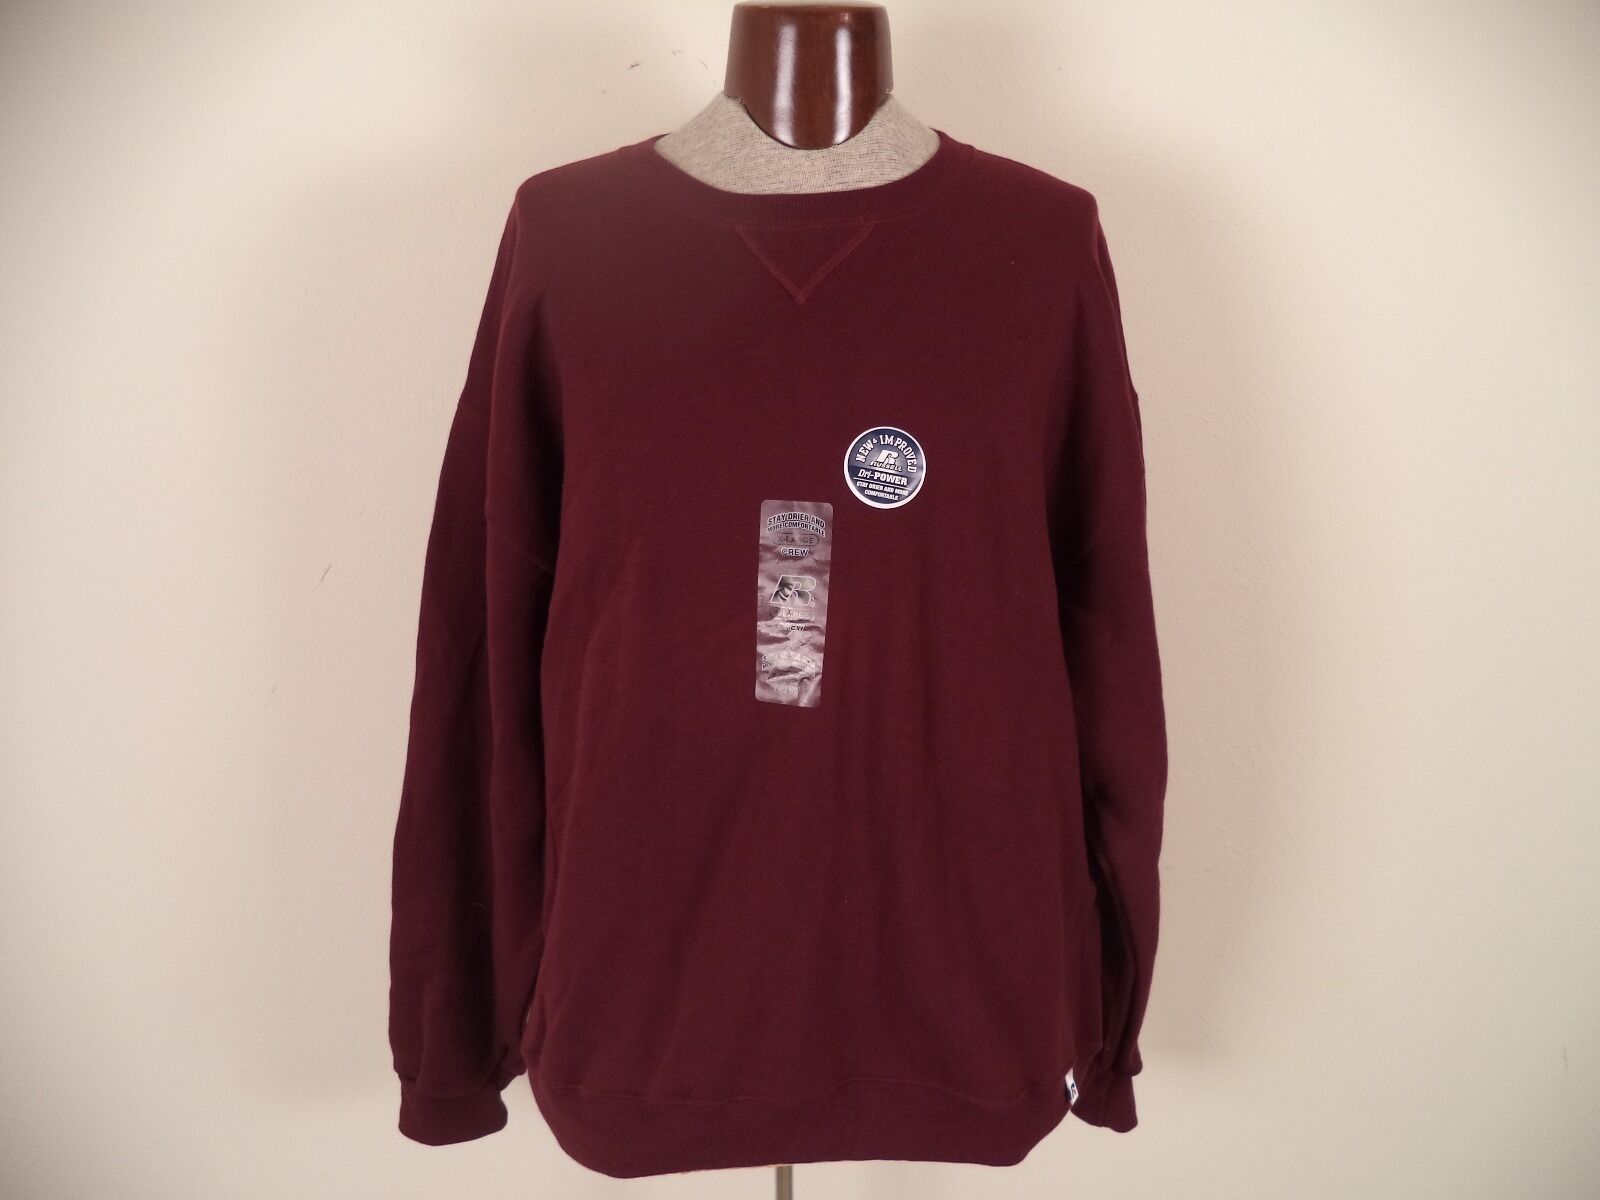 Primary image for Mens Sweatshirt. Russell . Dark Red. XL. 50% Polyester/ 50% Cotton. Long Sleeve.